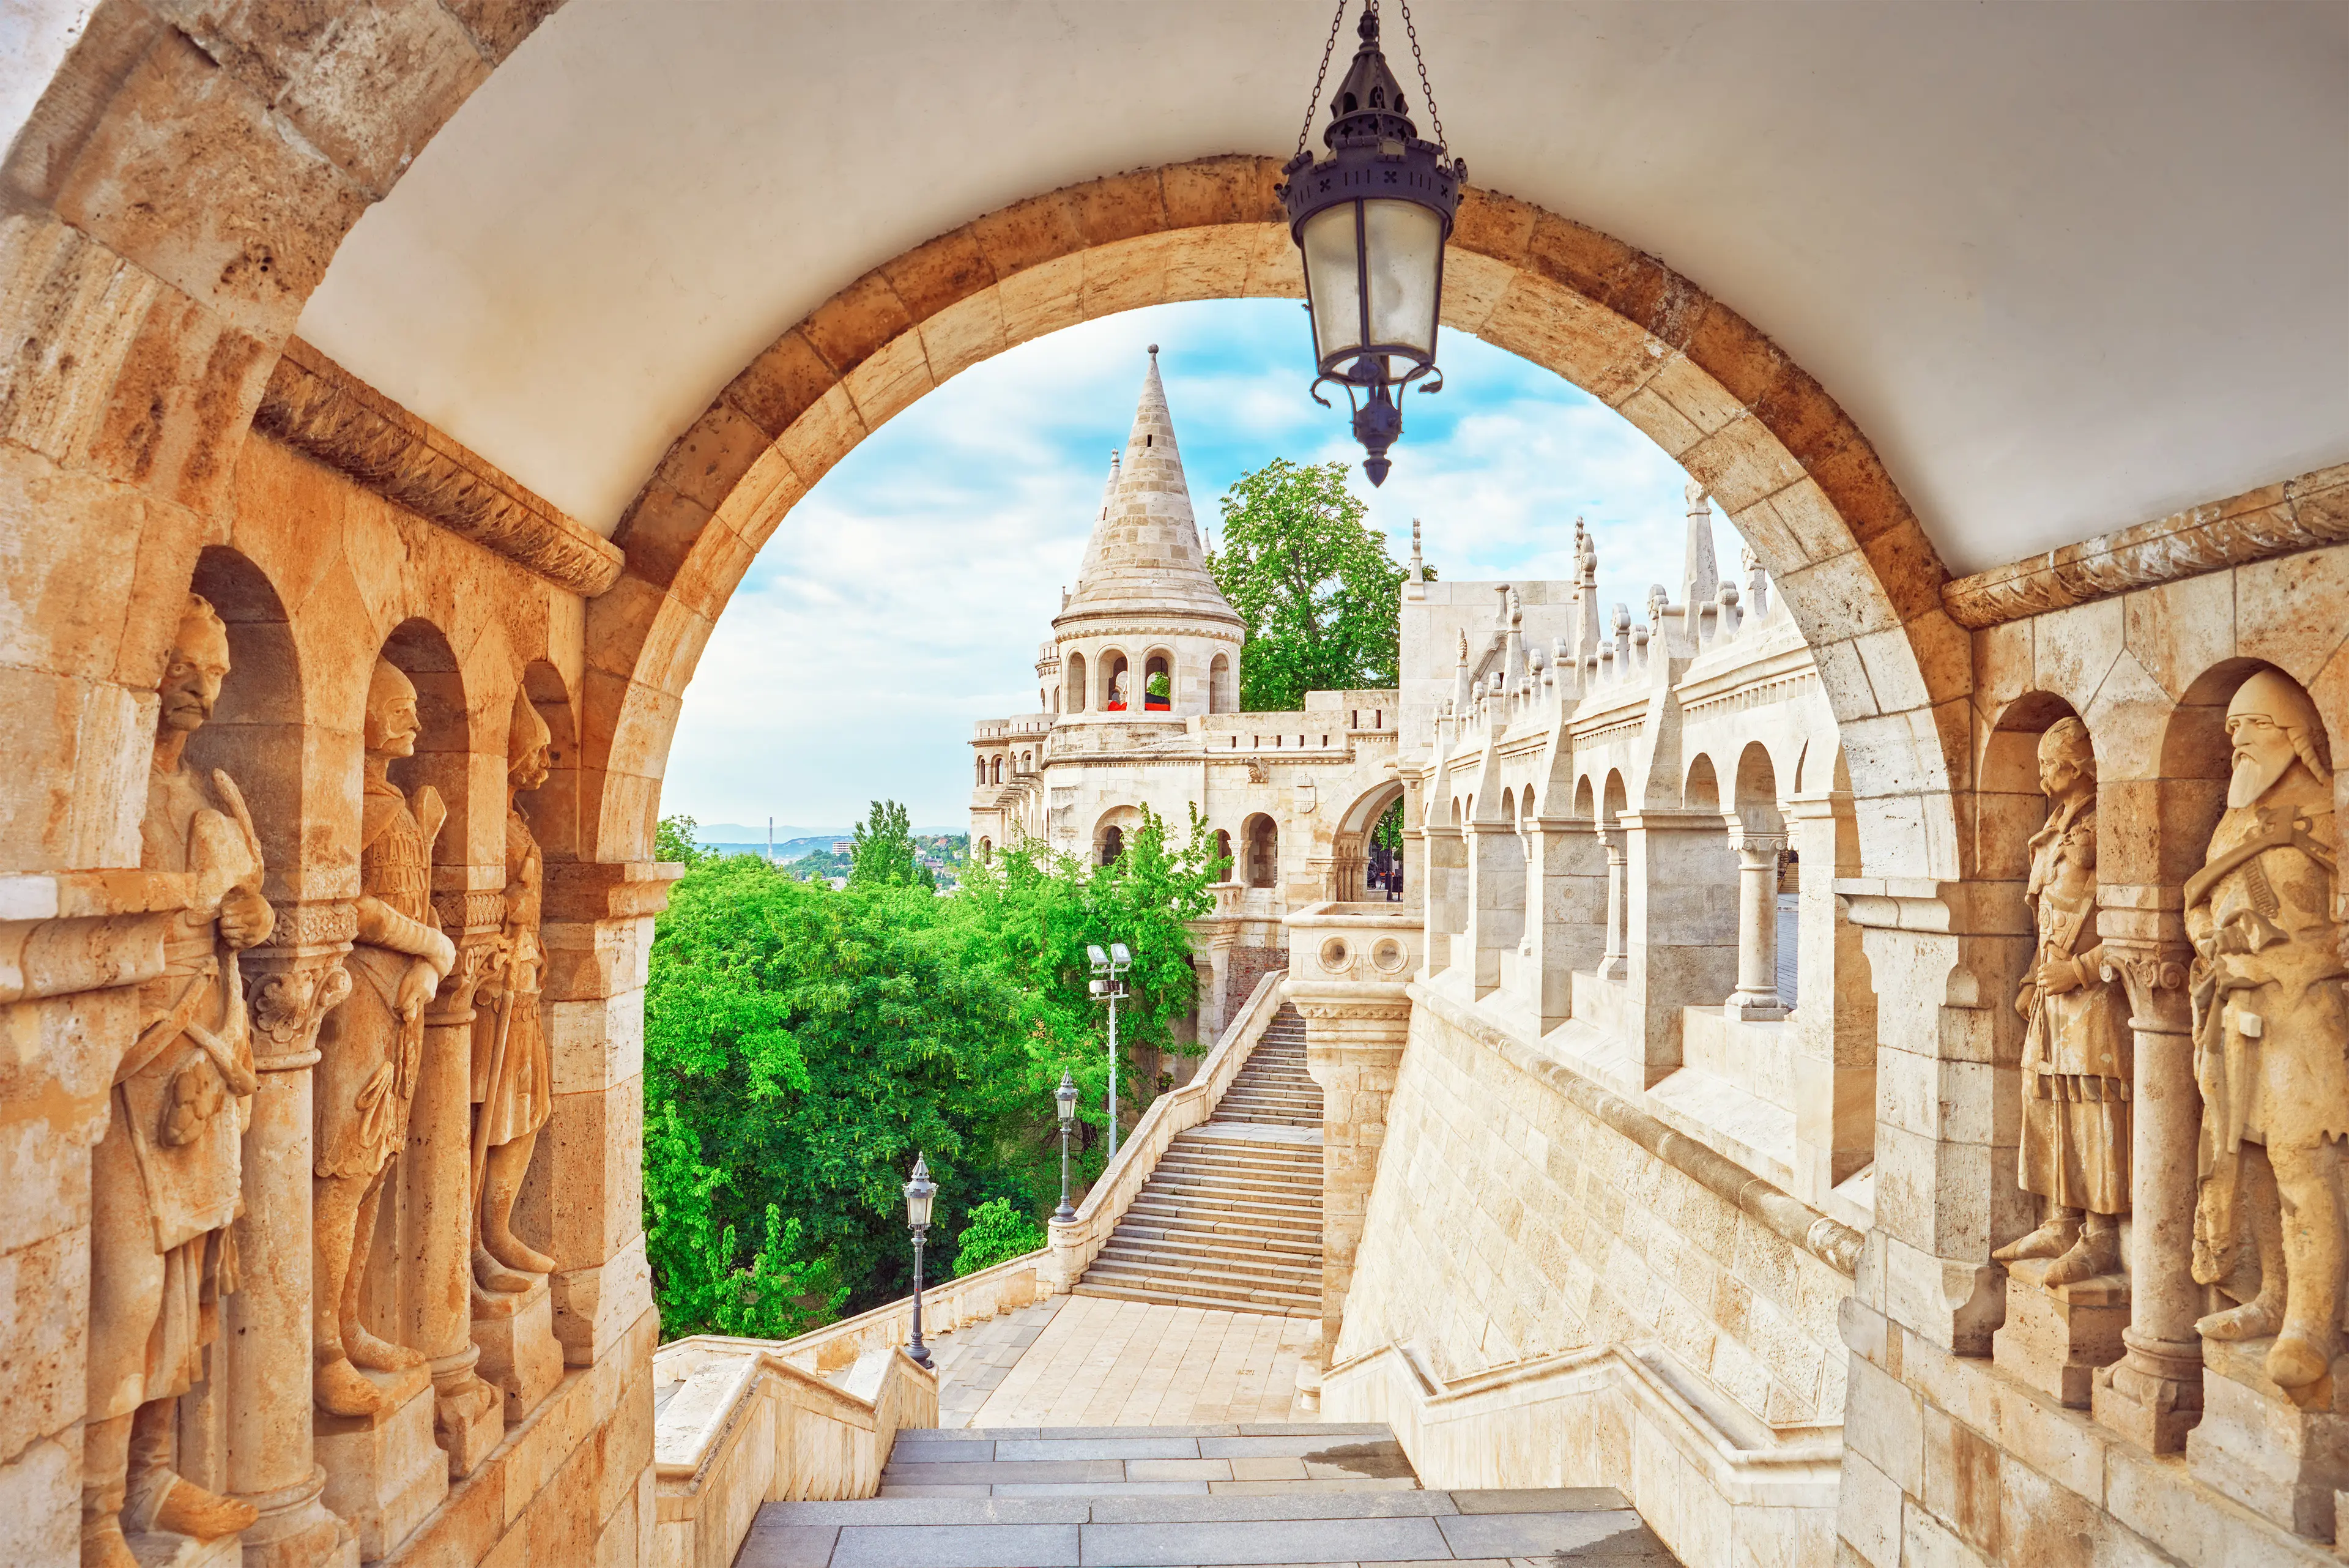 2-Day Budapest Romantic Retreat: Relaxation, Food & Wine Experience